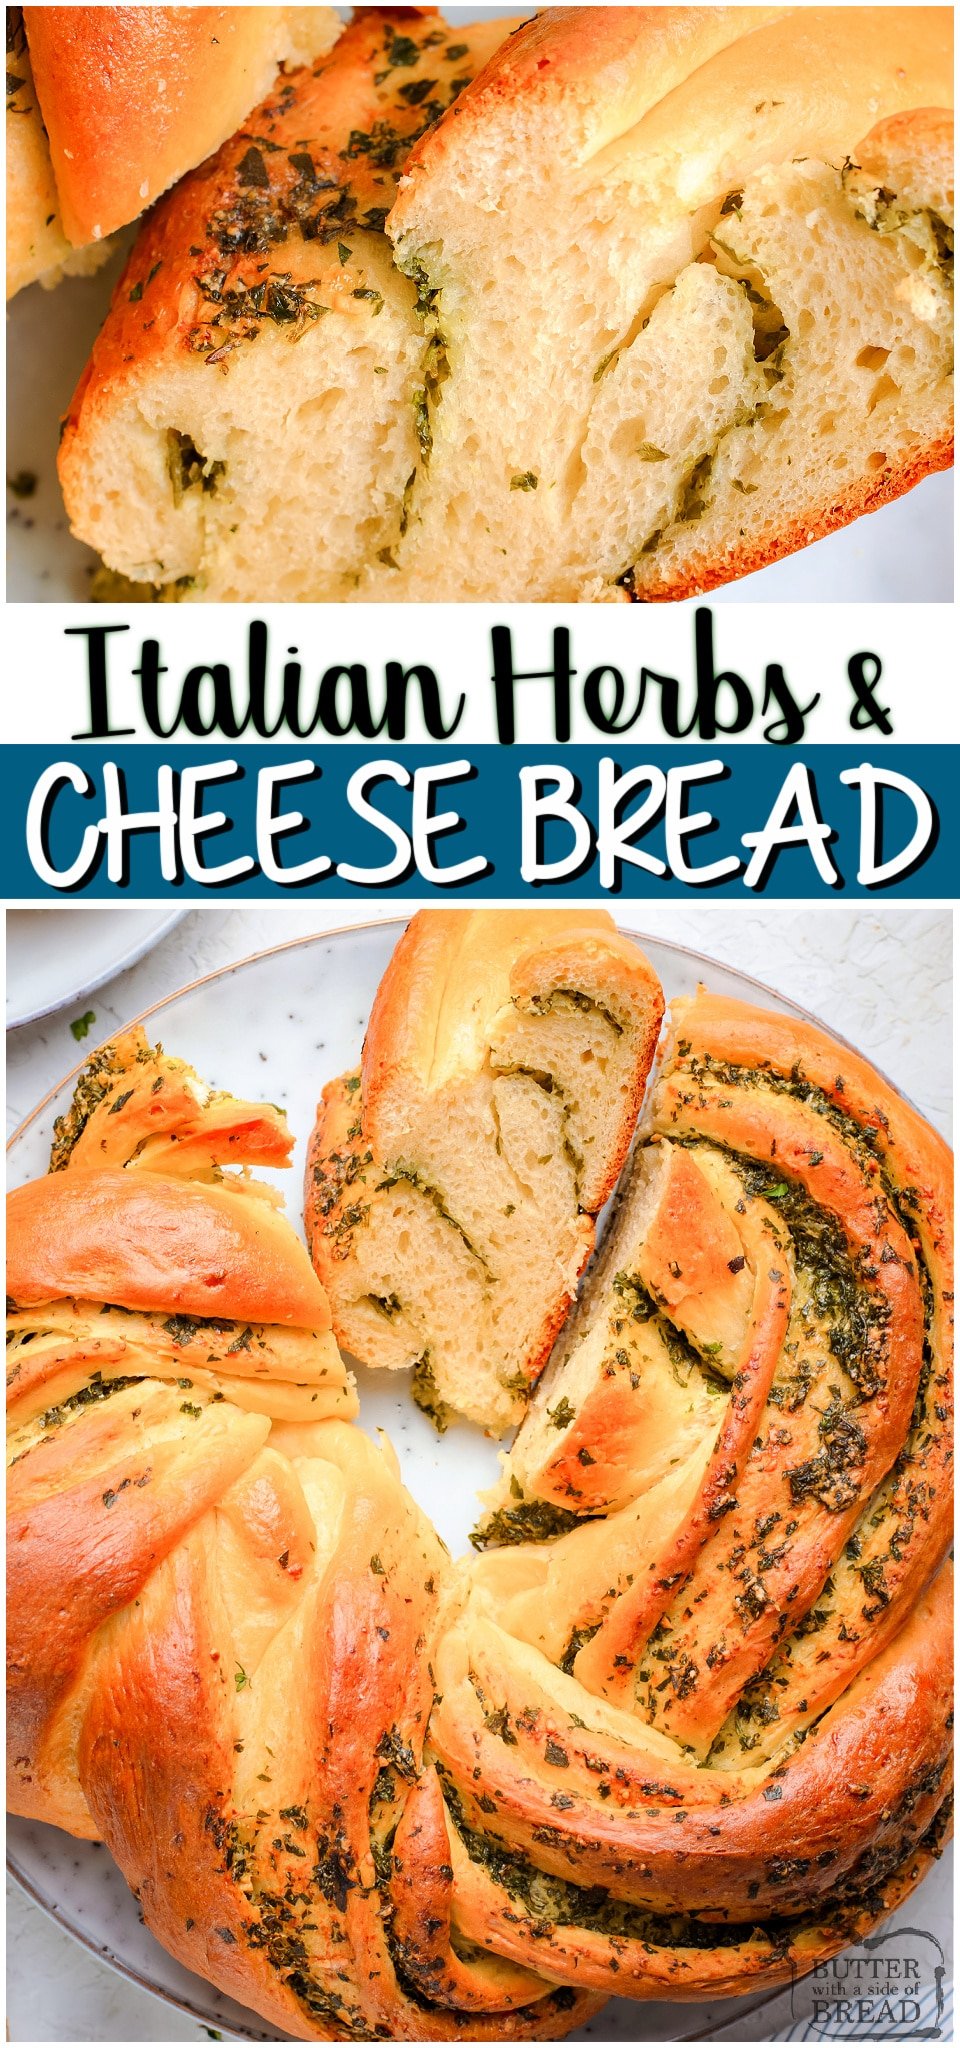 Italian Herbs & Cheese Bread is a soft, easy to make homemade bread bursting with fresh flavors! Herbs and cheese combine in this incredible savory bread recipe. #bread #herbs #cheese #baking #homemade #cheesebread #easyrecipe from BUTTER WITH A SIDE OF BREAD